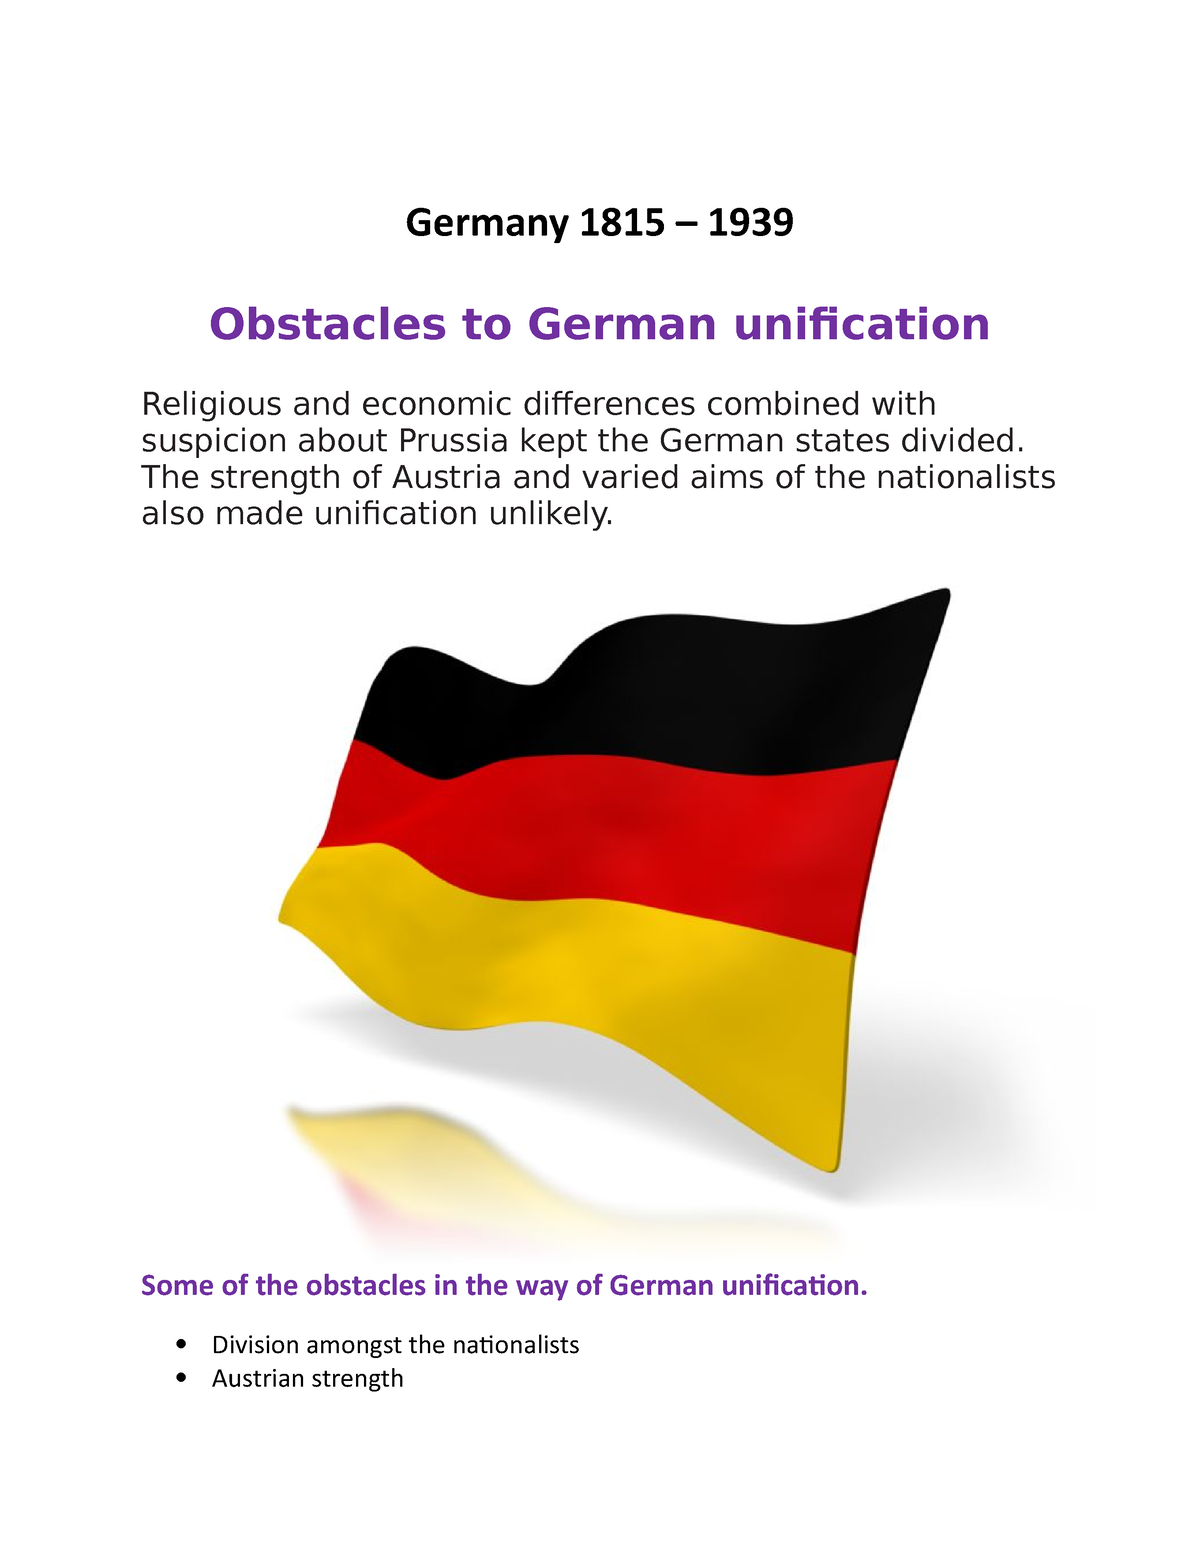 obstacles to german unification higher history essay